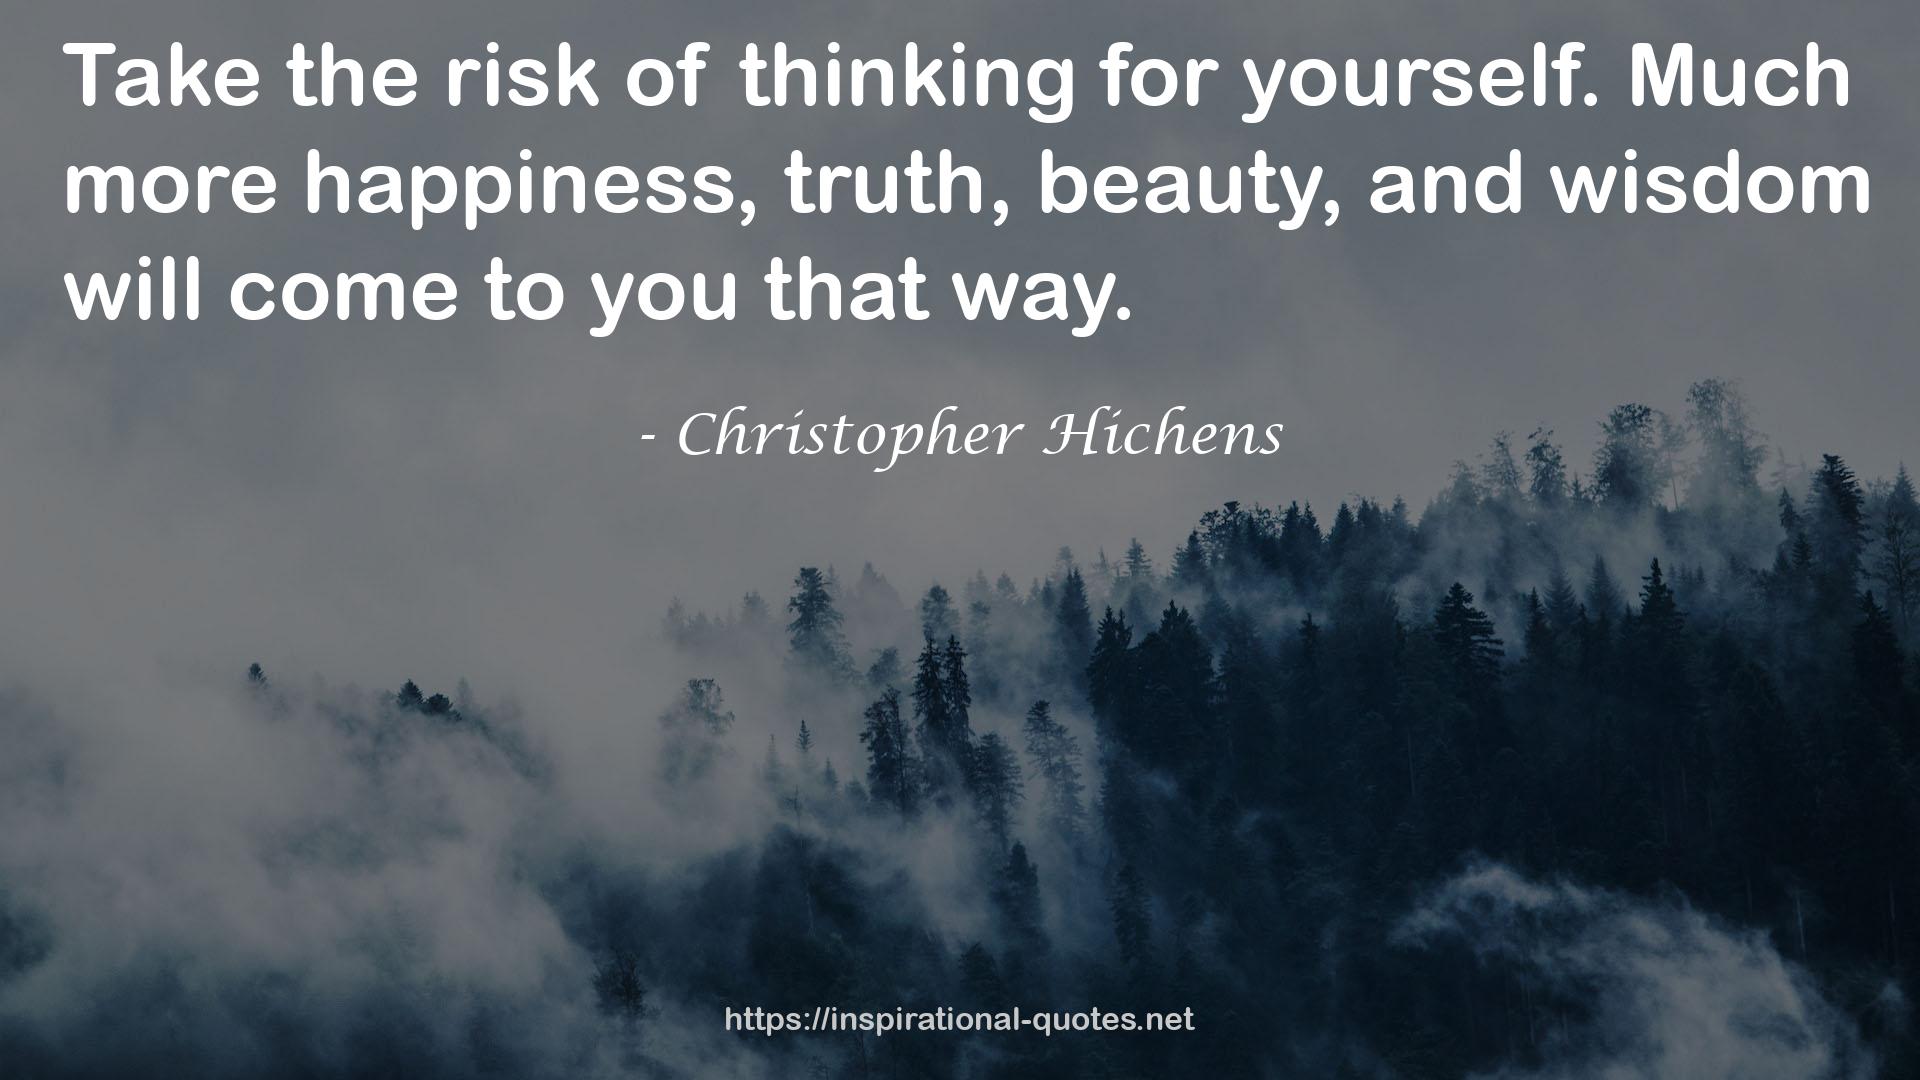 Christopher Hichens QUOTES